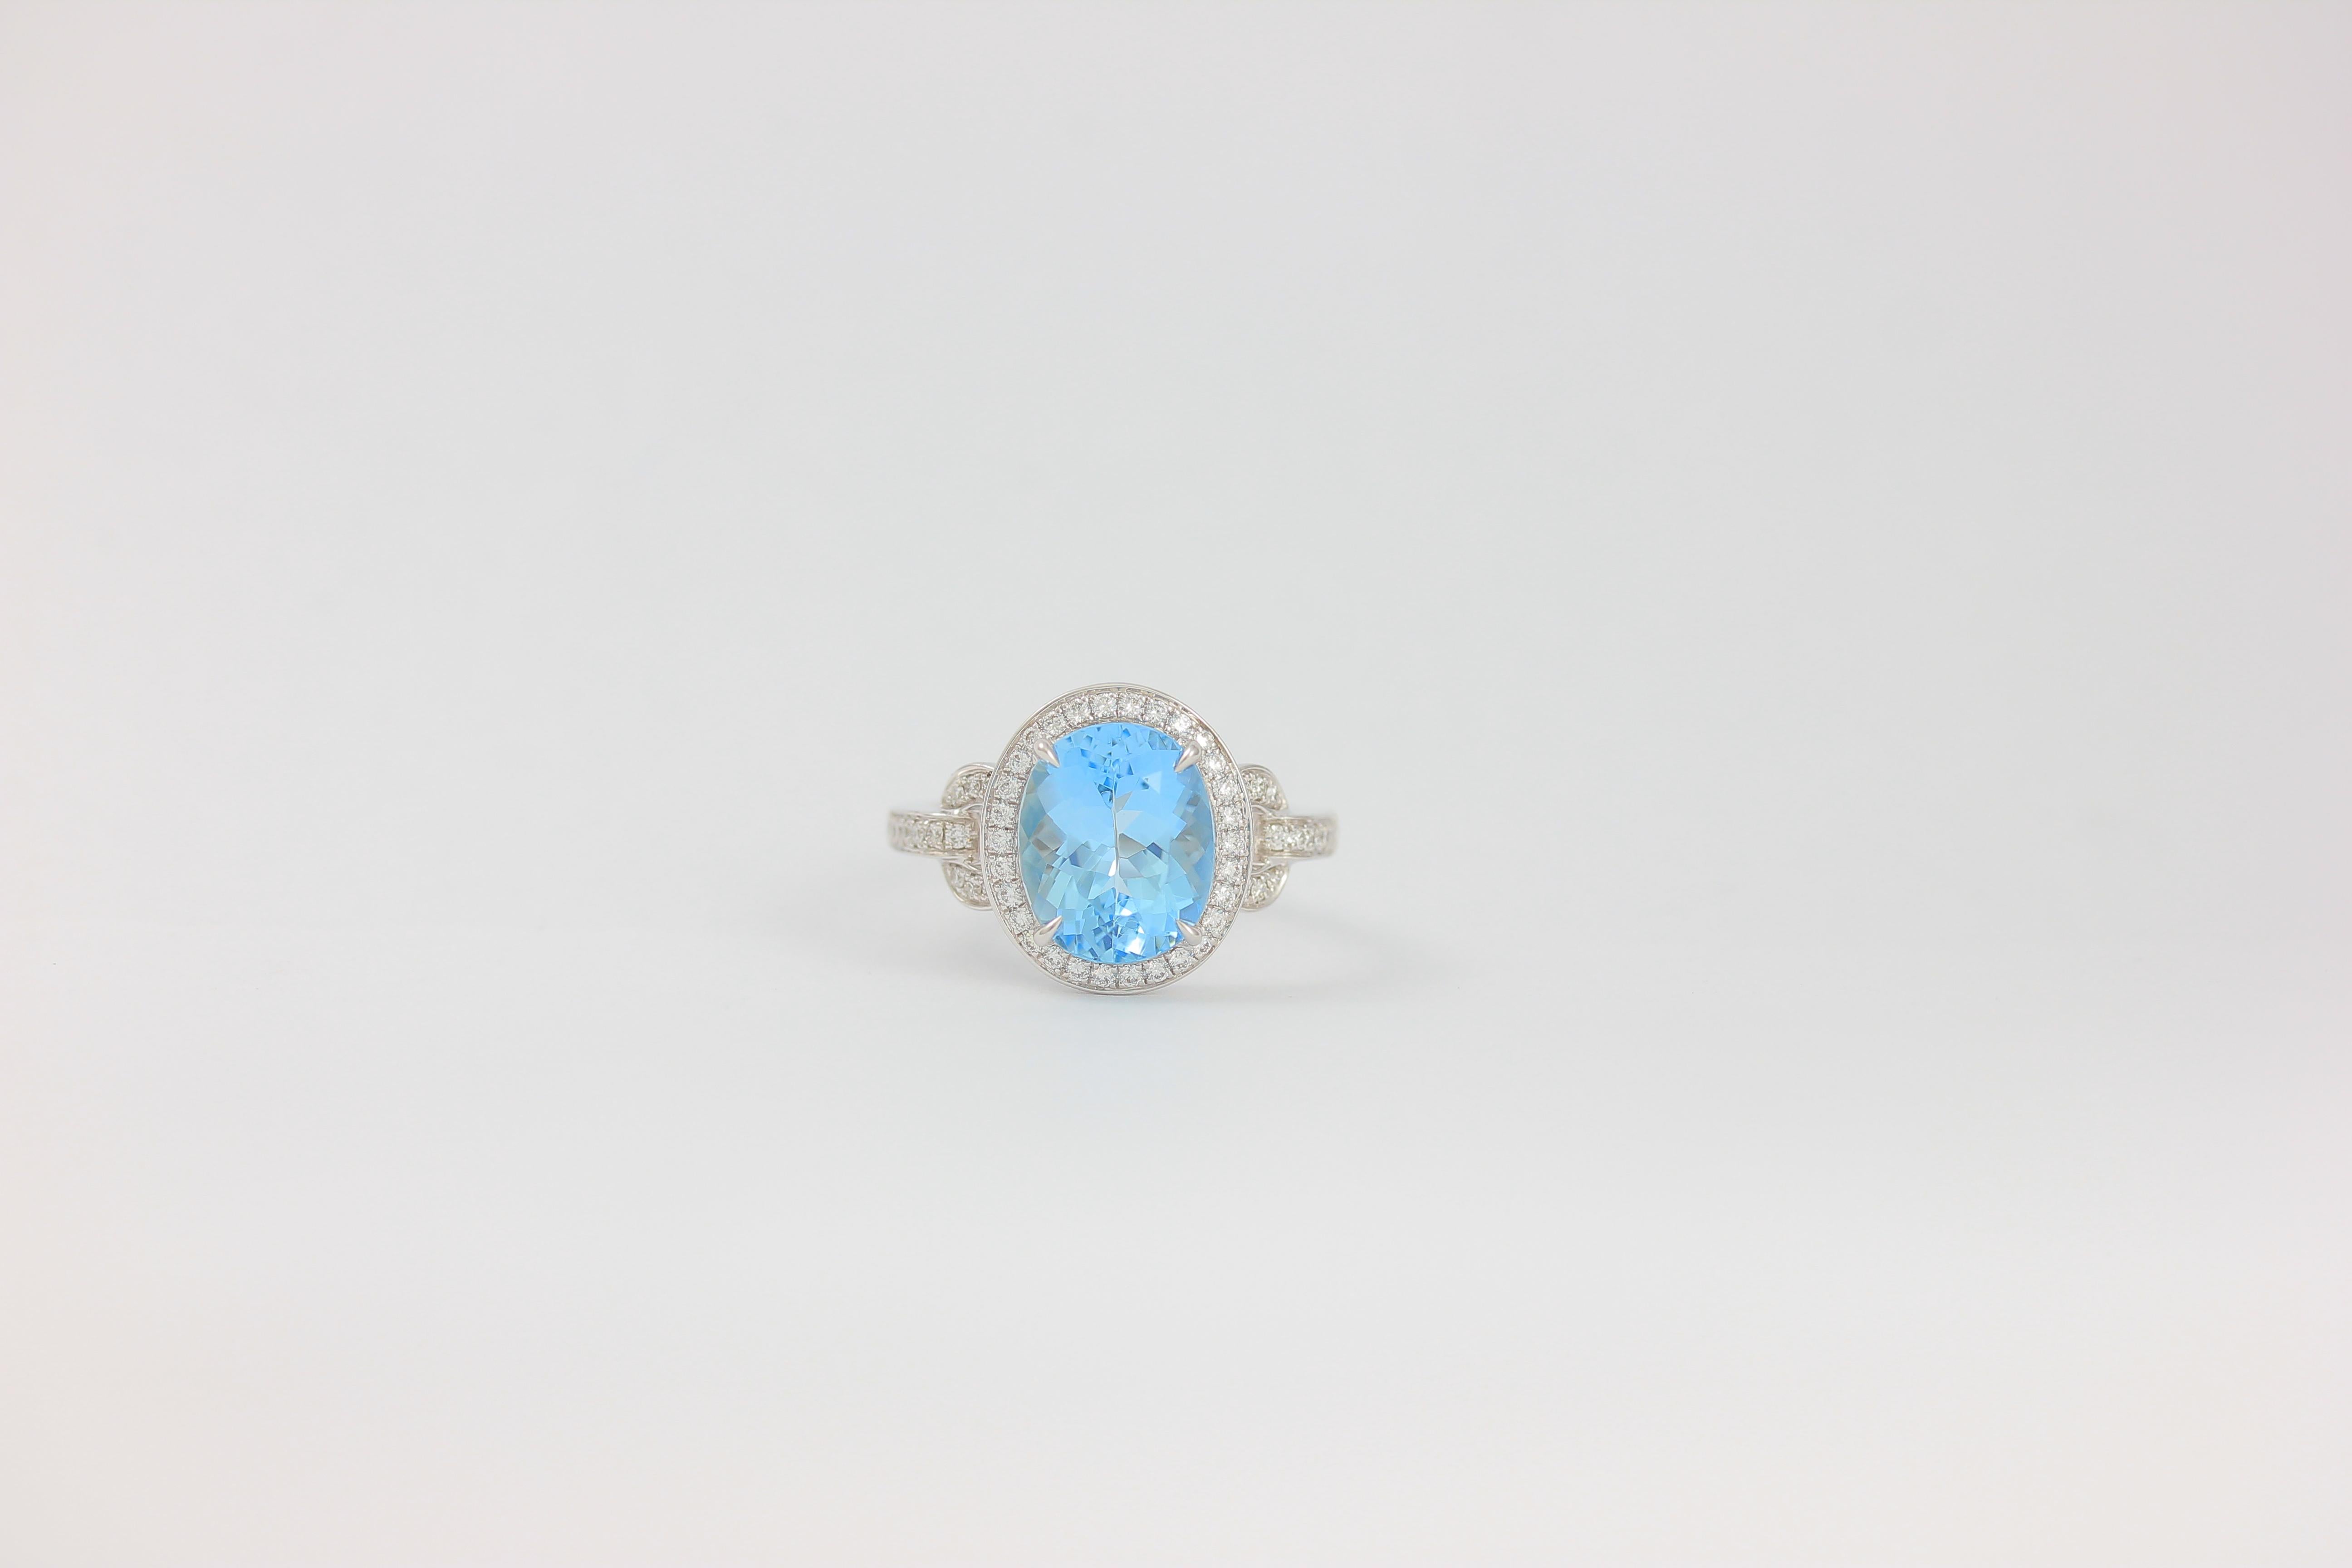 Contemporary Frederic Sage 3.60 Carat Oval Aquamarine Diamond One of Kind Ring For Sale